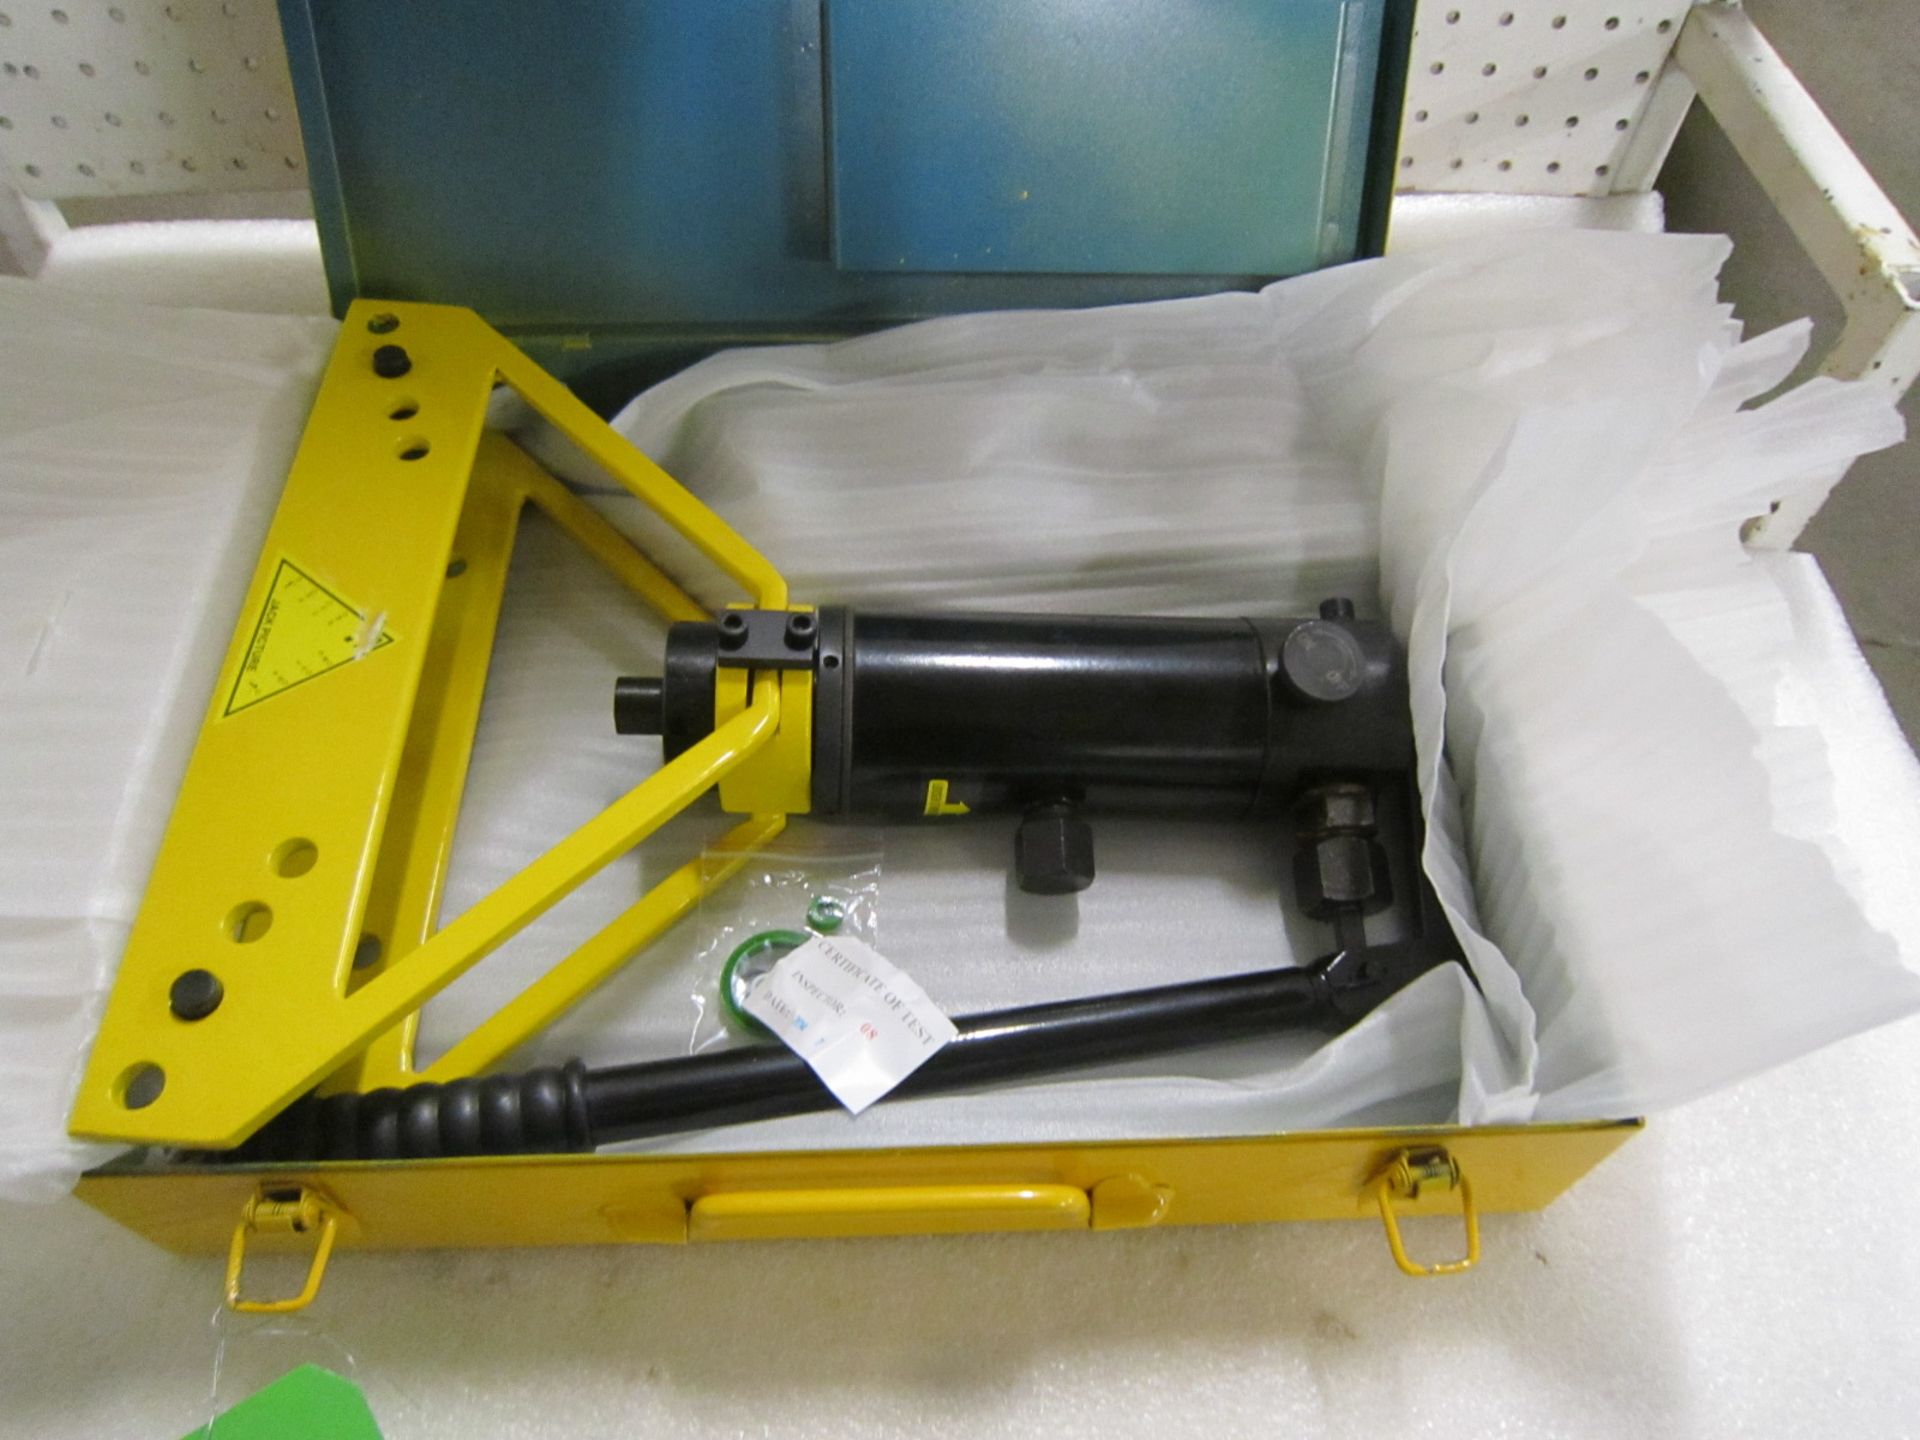 Power Team Hydraulics style tube Bender unit up to 1" capacity including dies in case - MINT, UNUSED